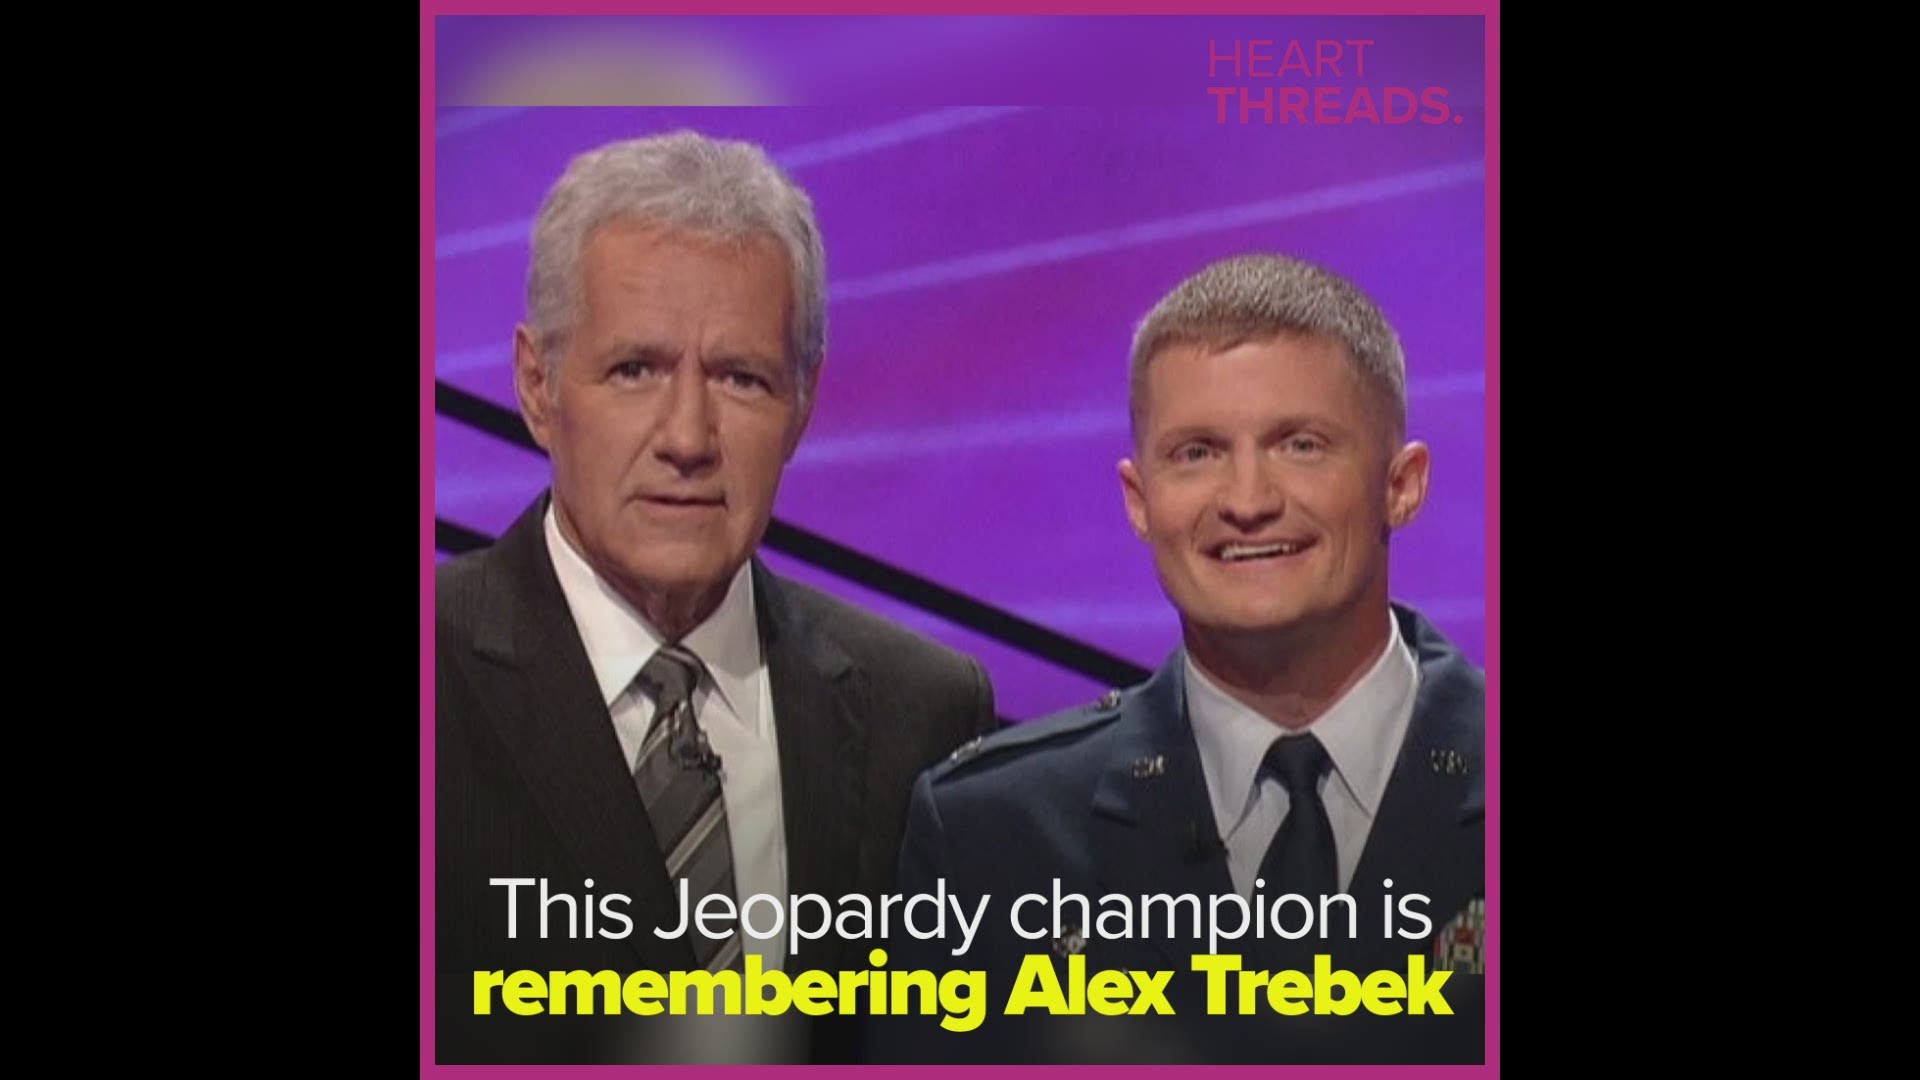 After Alex Trebek's passing, a former 'Jeopardy!' contestant reflects on his personal experience with the game show legend.